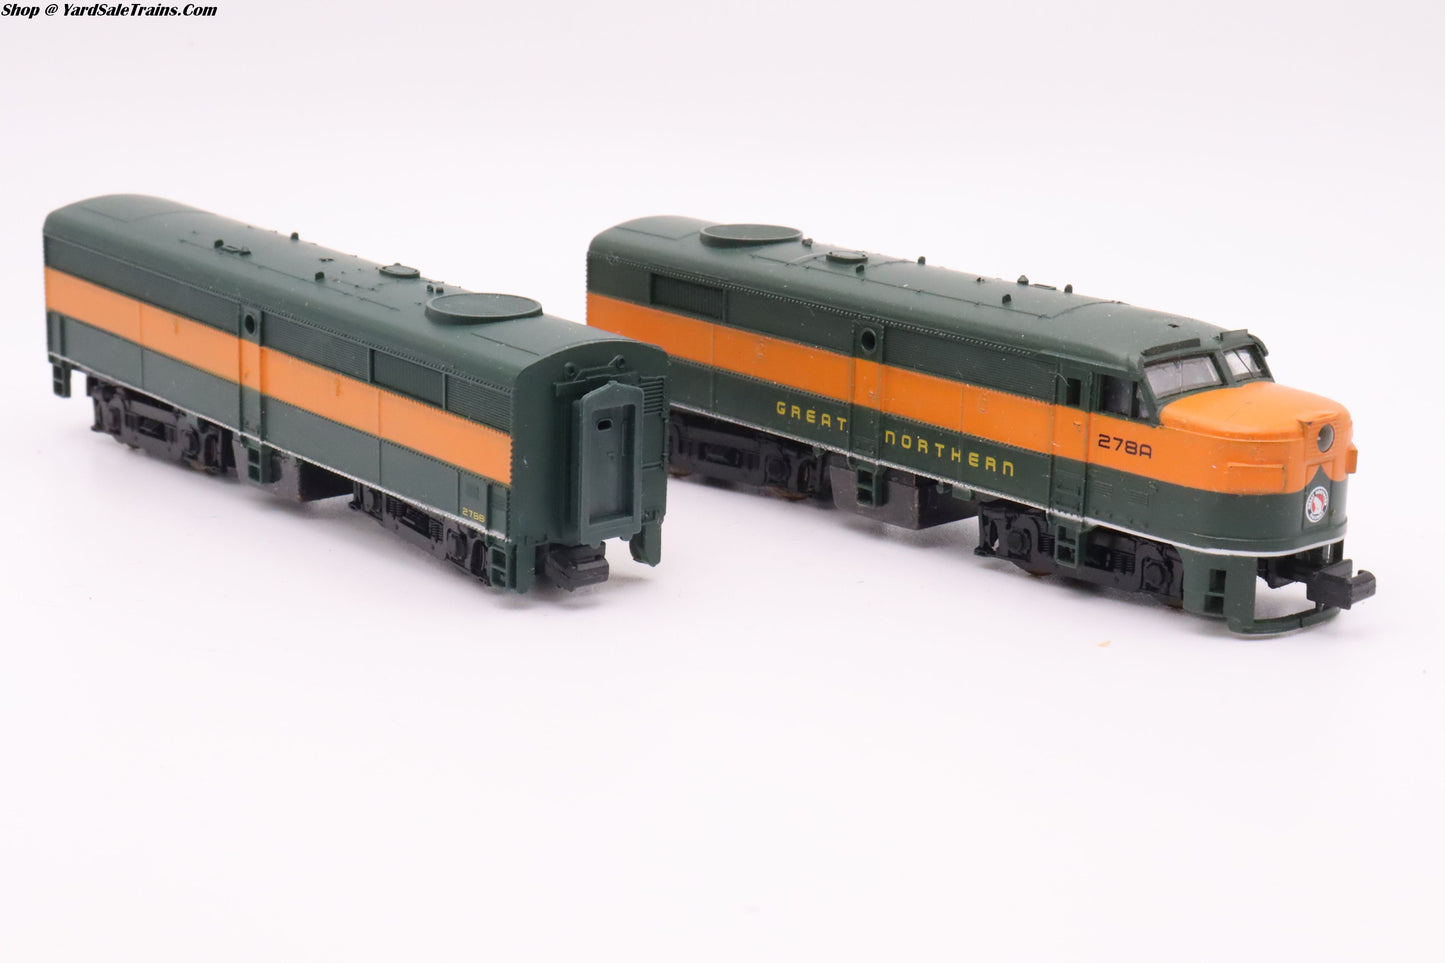 LL-7918 / LL-7919 - FA2/FB2 Locomotive Set - Great Northern - GN # 278A / 278B - N Scale - Preowned